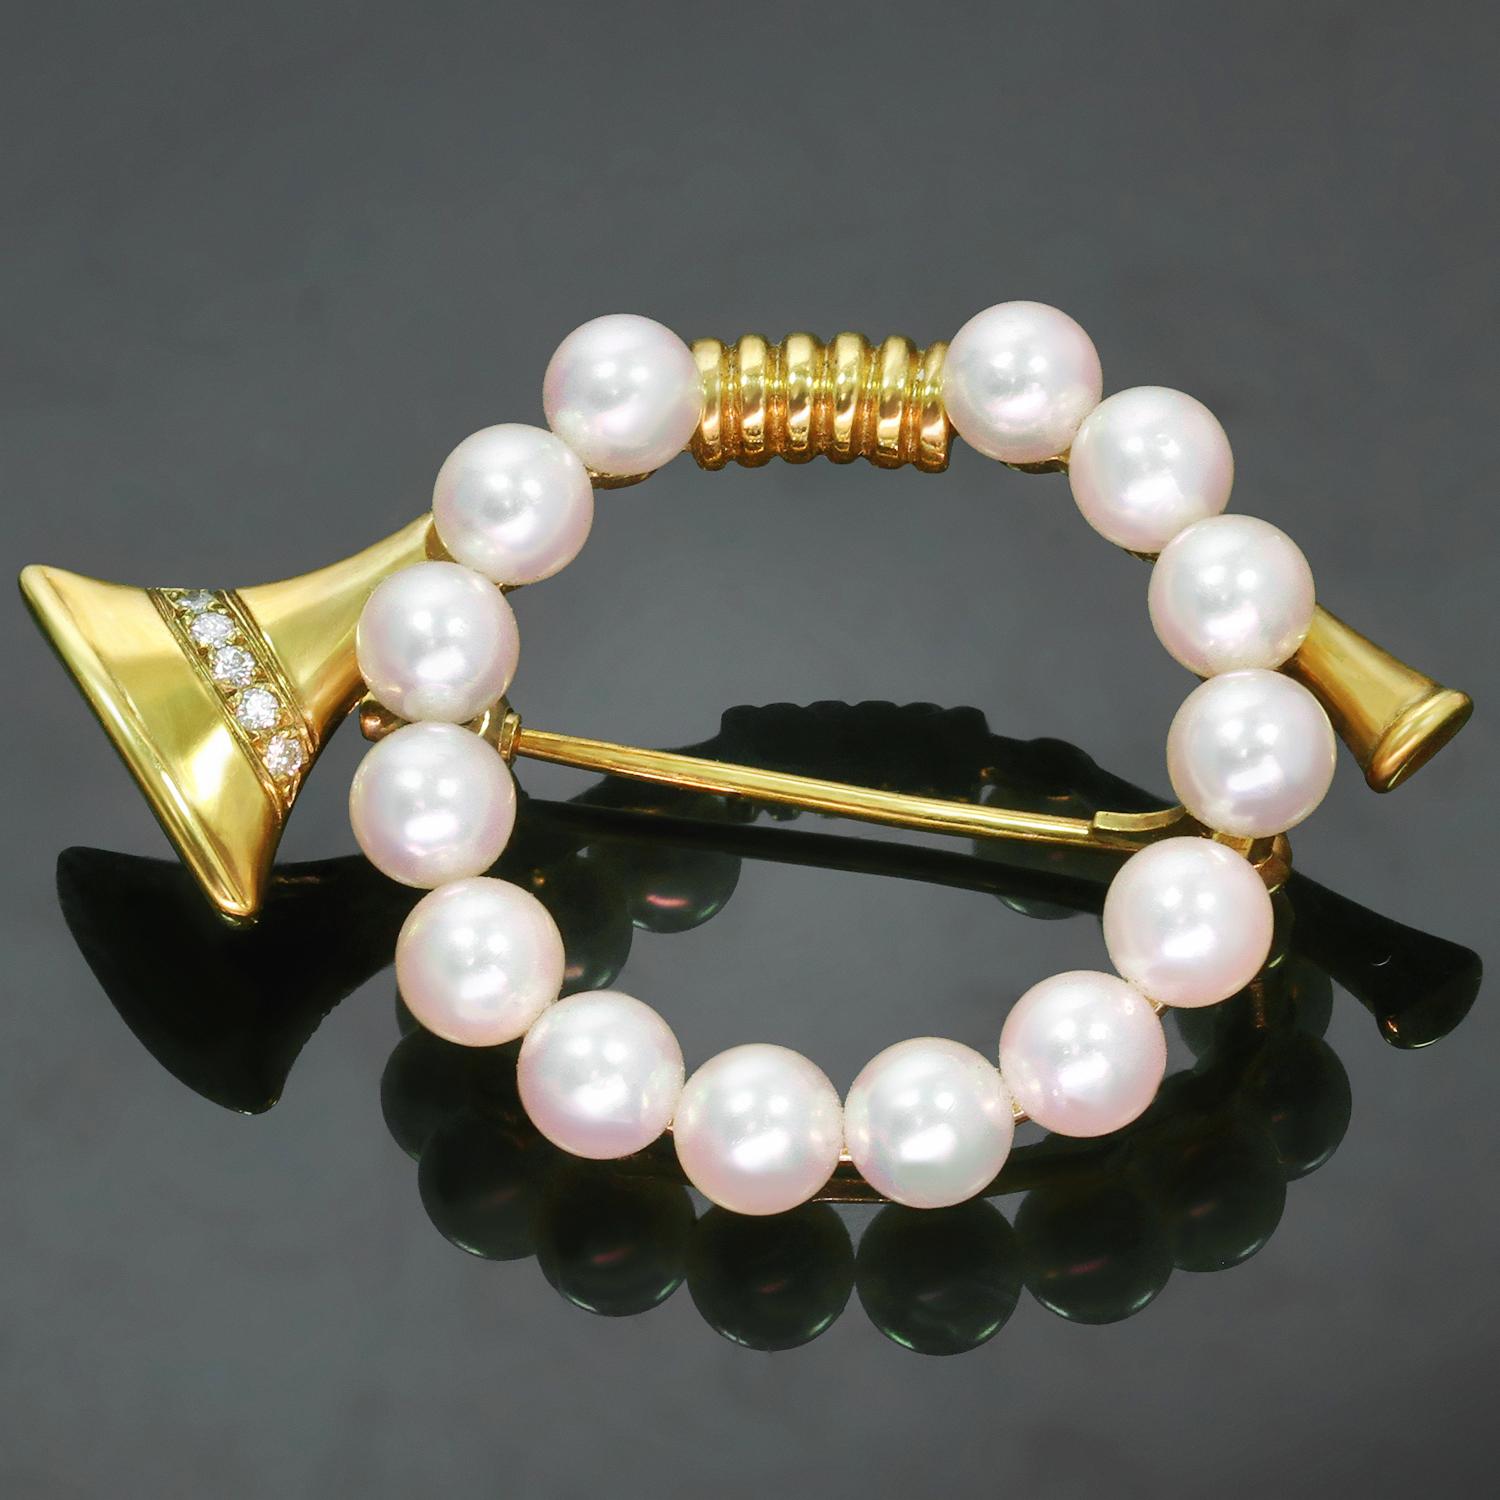 This adorable pearl and diamond brooch from Mikimoto is the epitome of stylish charm. Set in 18k yellow gold. Refine your lifestyle. Measurements: 1.06